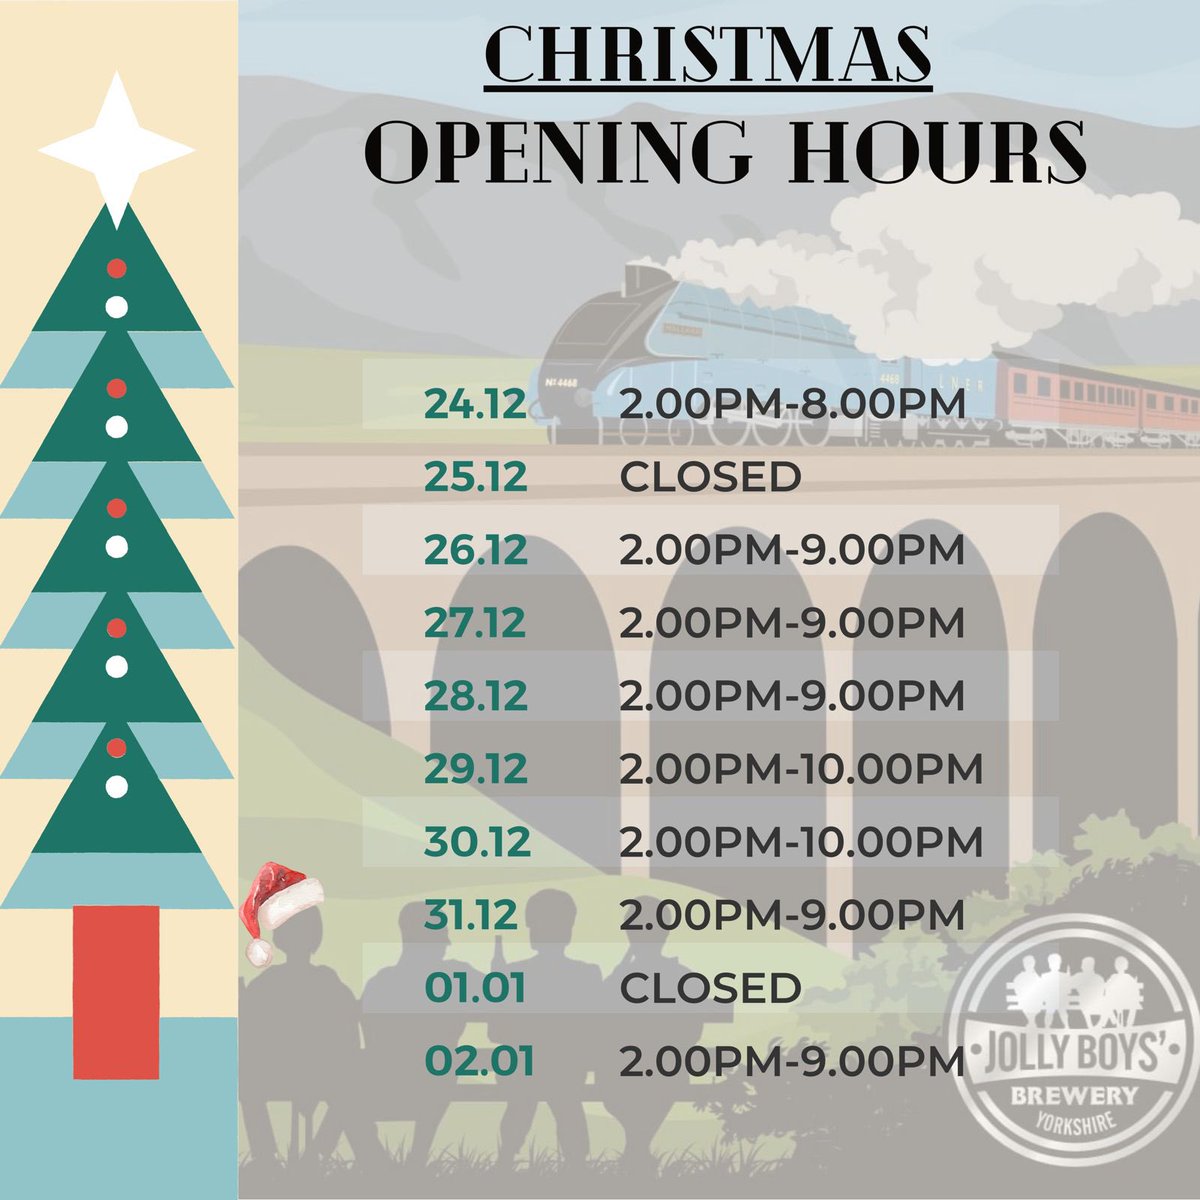 Our opening times for Christmas! Come and see us @arcade_jollytap @JollyTap 🎅🏼😃🍻 @WakefieldCamra @BarnsleyCAMRA